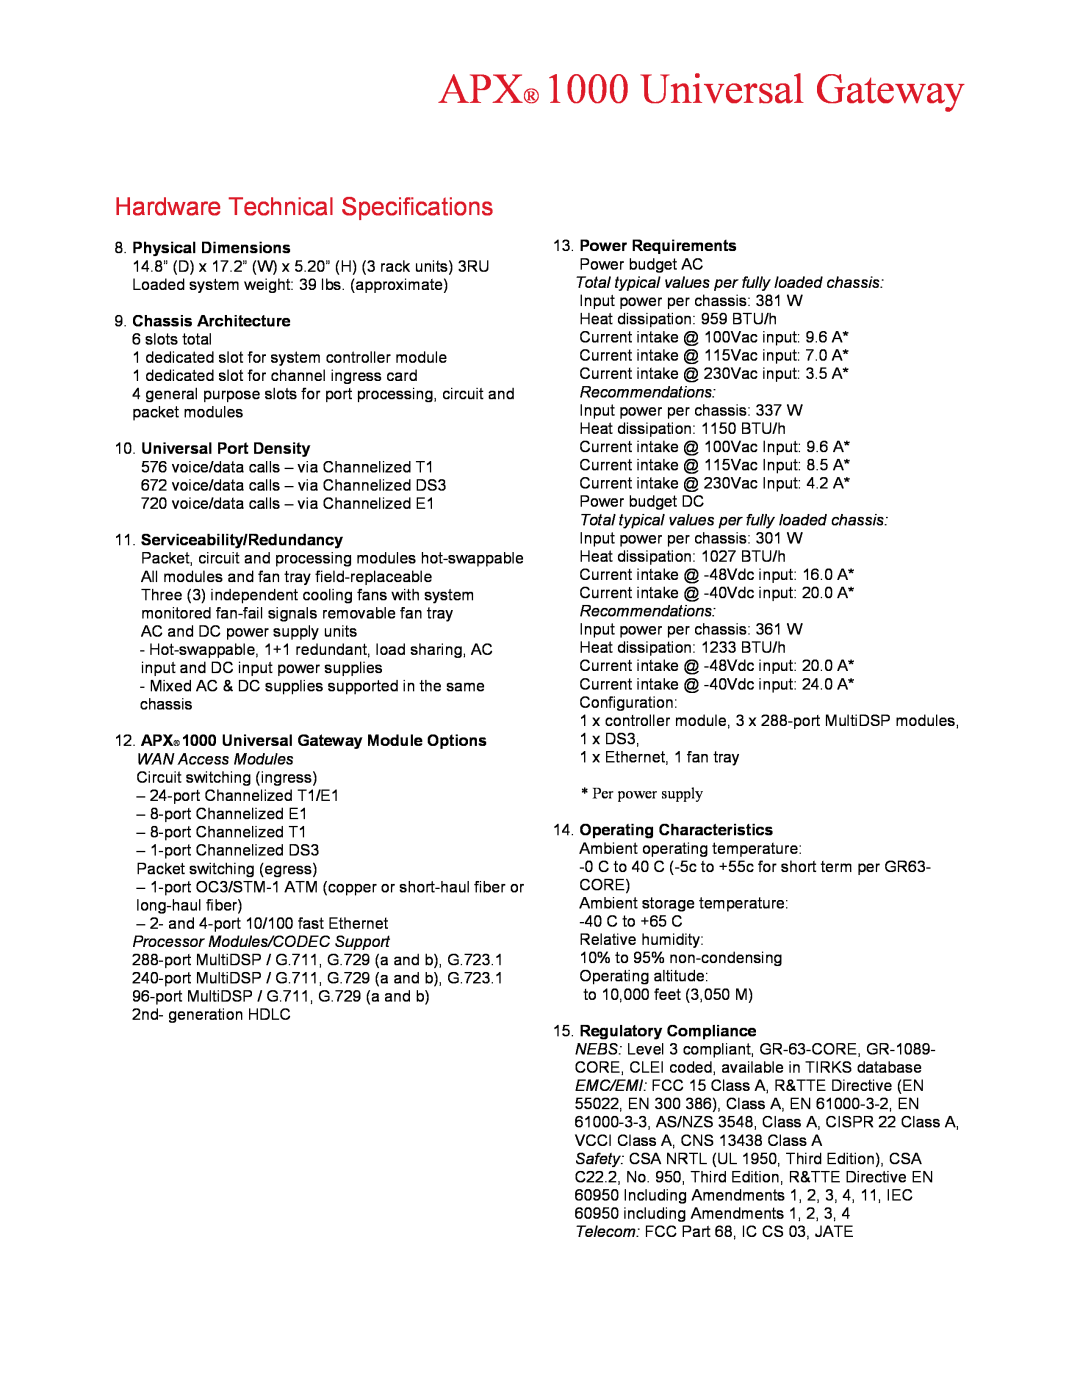 Lucent Technologies Hardware Technical Specifications, APX 1000 Universal Gateway, Physical Dimensions, Recommendations 